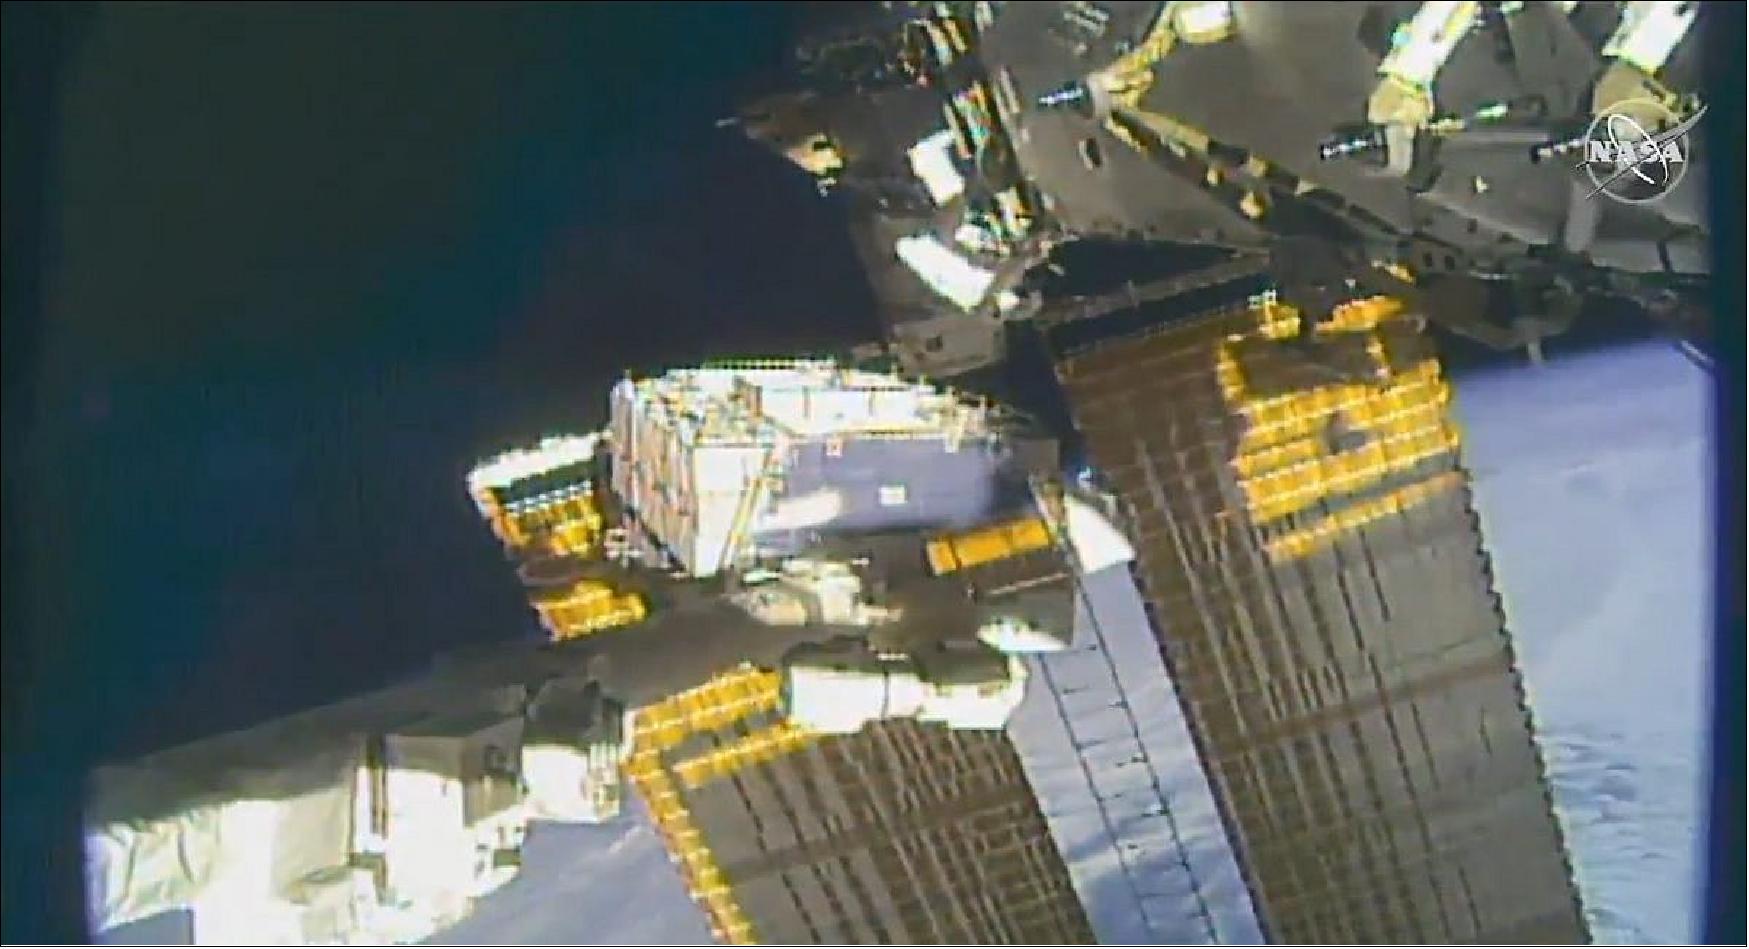 Figure 7: NASA astronaut pictured tethered on the space station’s truss structure during a spacewalk to swap batteries and route cables (image credit: NASA TV)